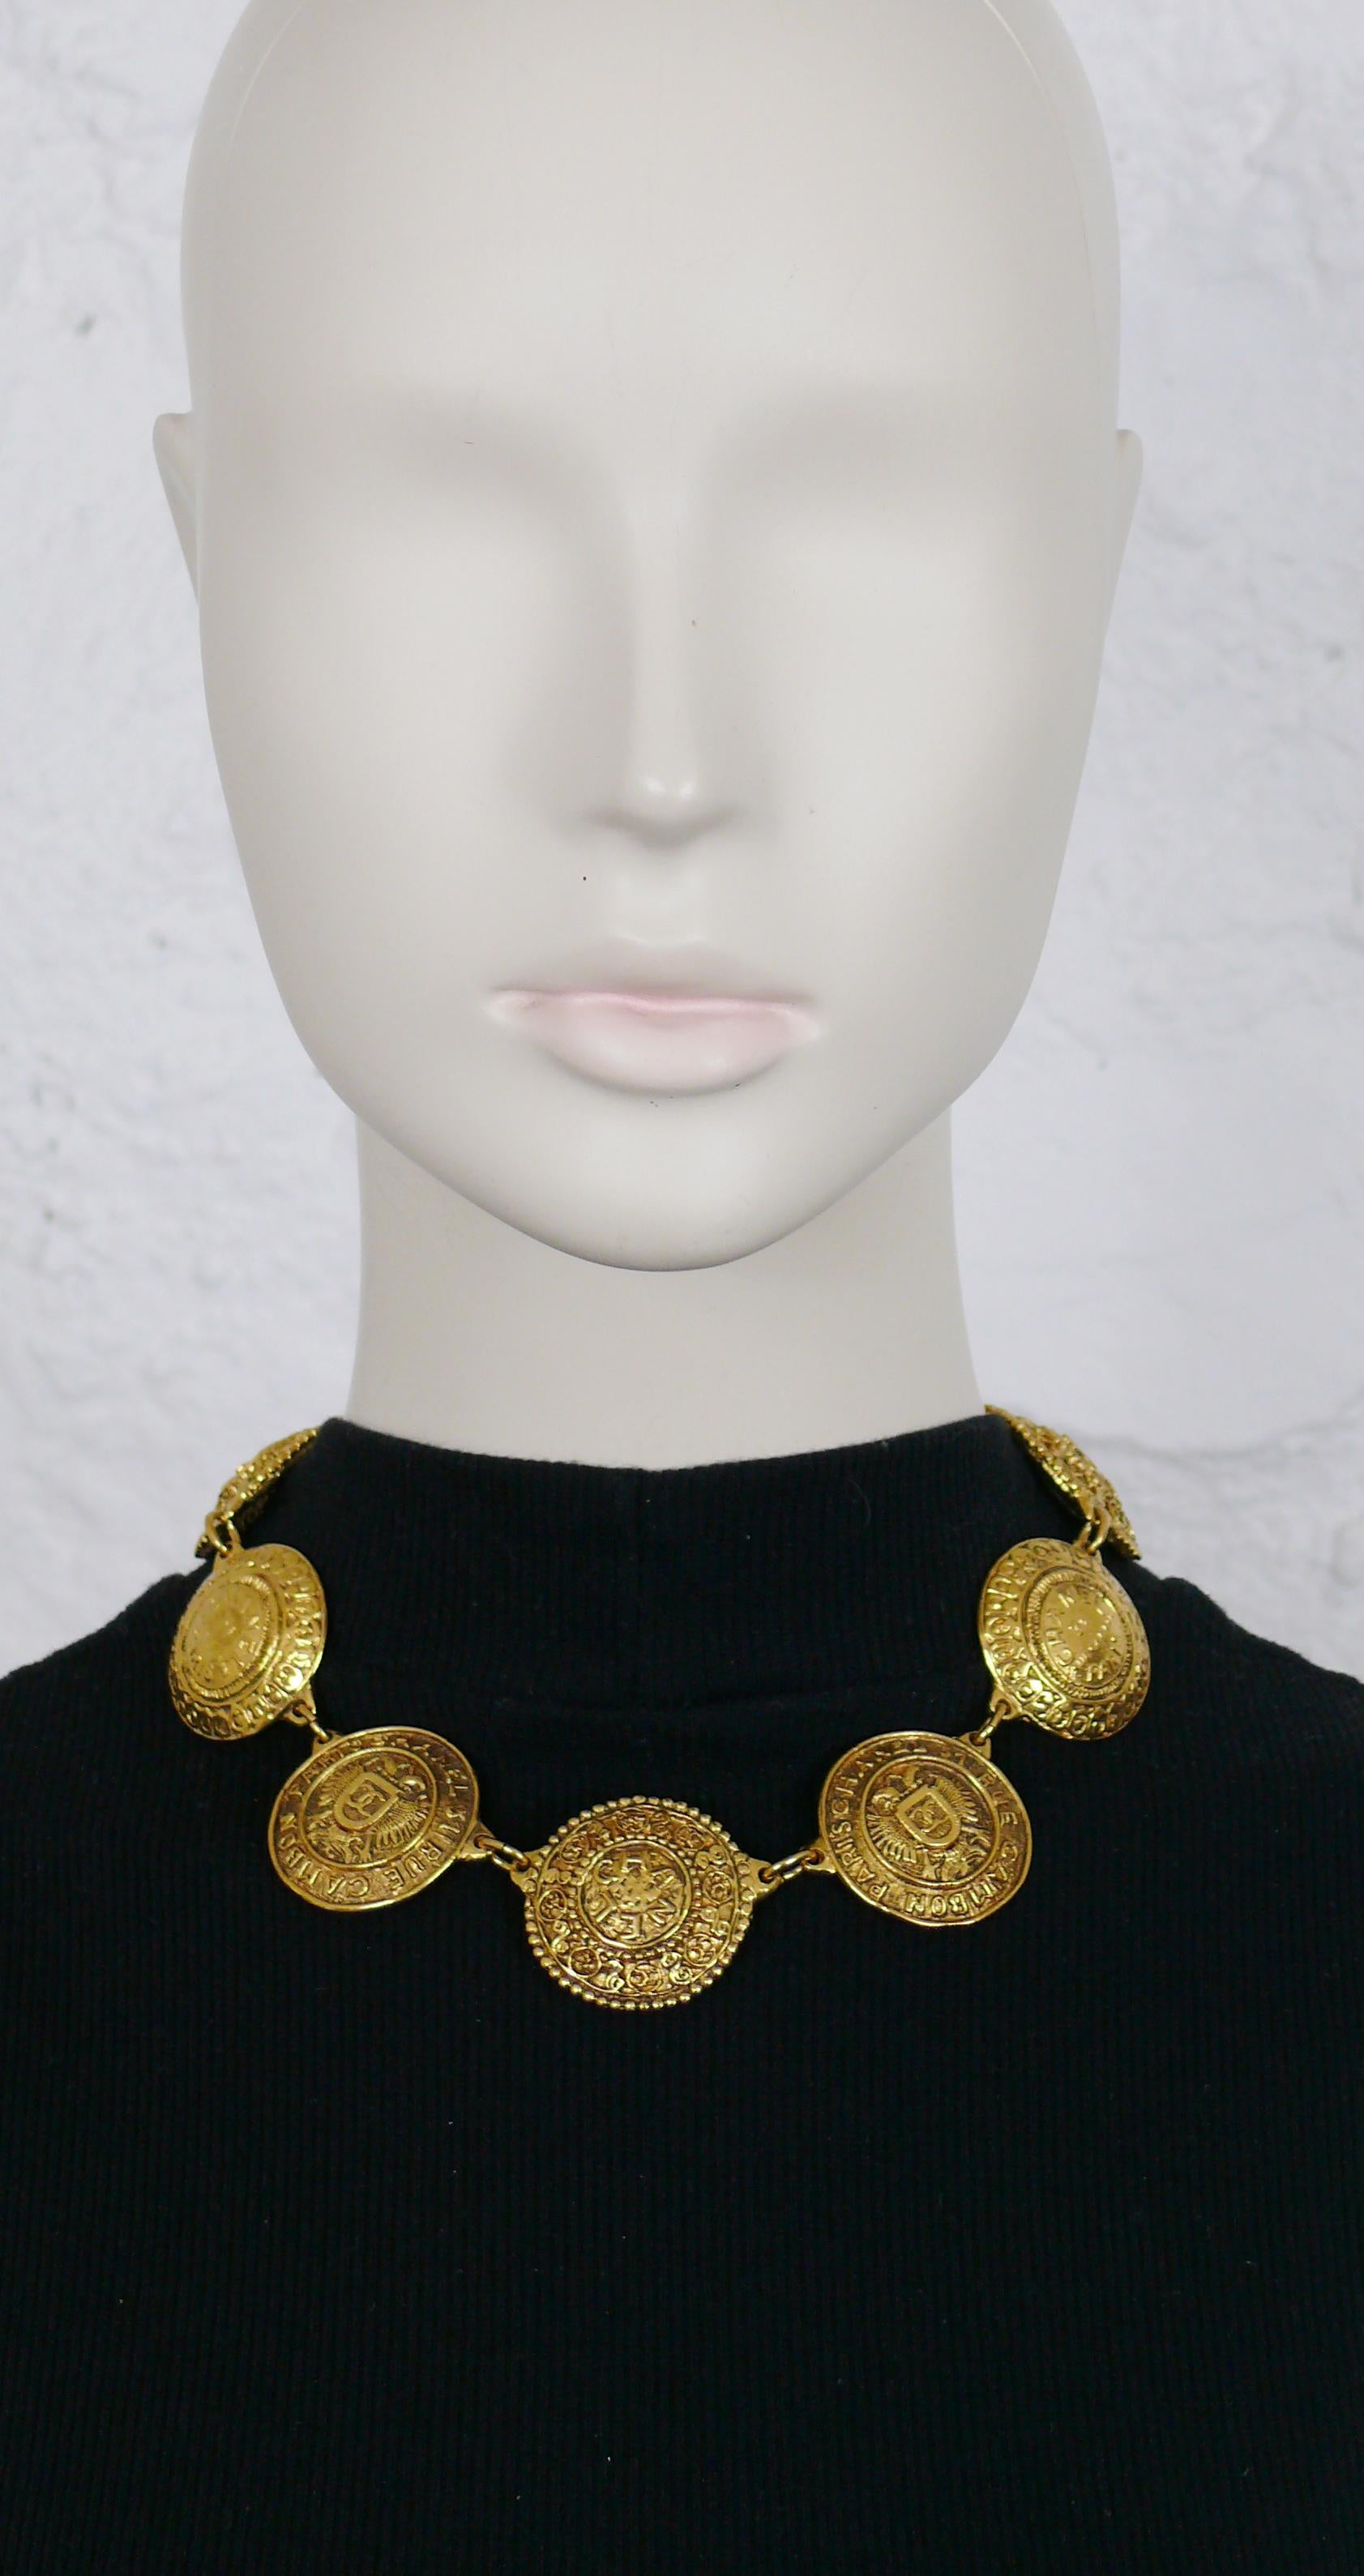 CHANEL vintage antiqued gold toned coat of arms medallion collar necklace.

Four medallions are embossed with CHANEL 31 RUE DE CAMBON PARIS, double-headed eagle and CC logo.
Three medallions are embossed with CHANEL surrounded with ornate